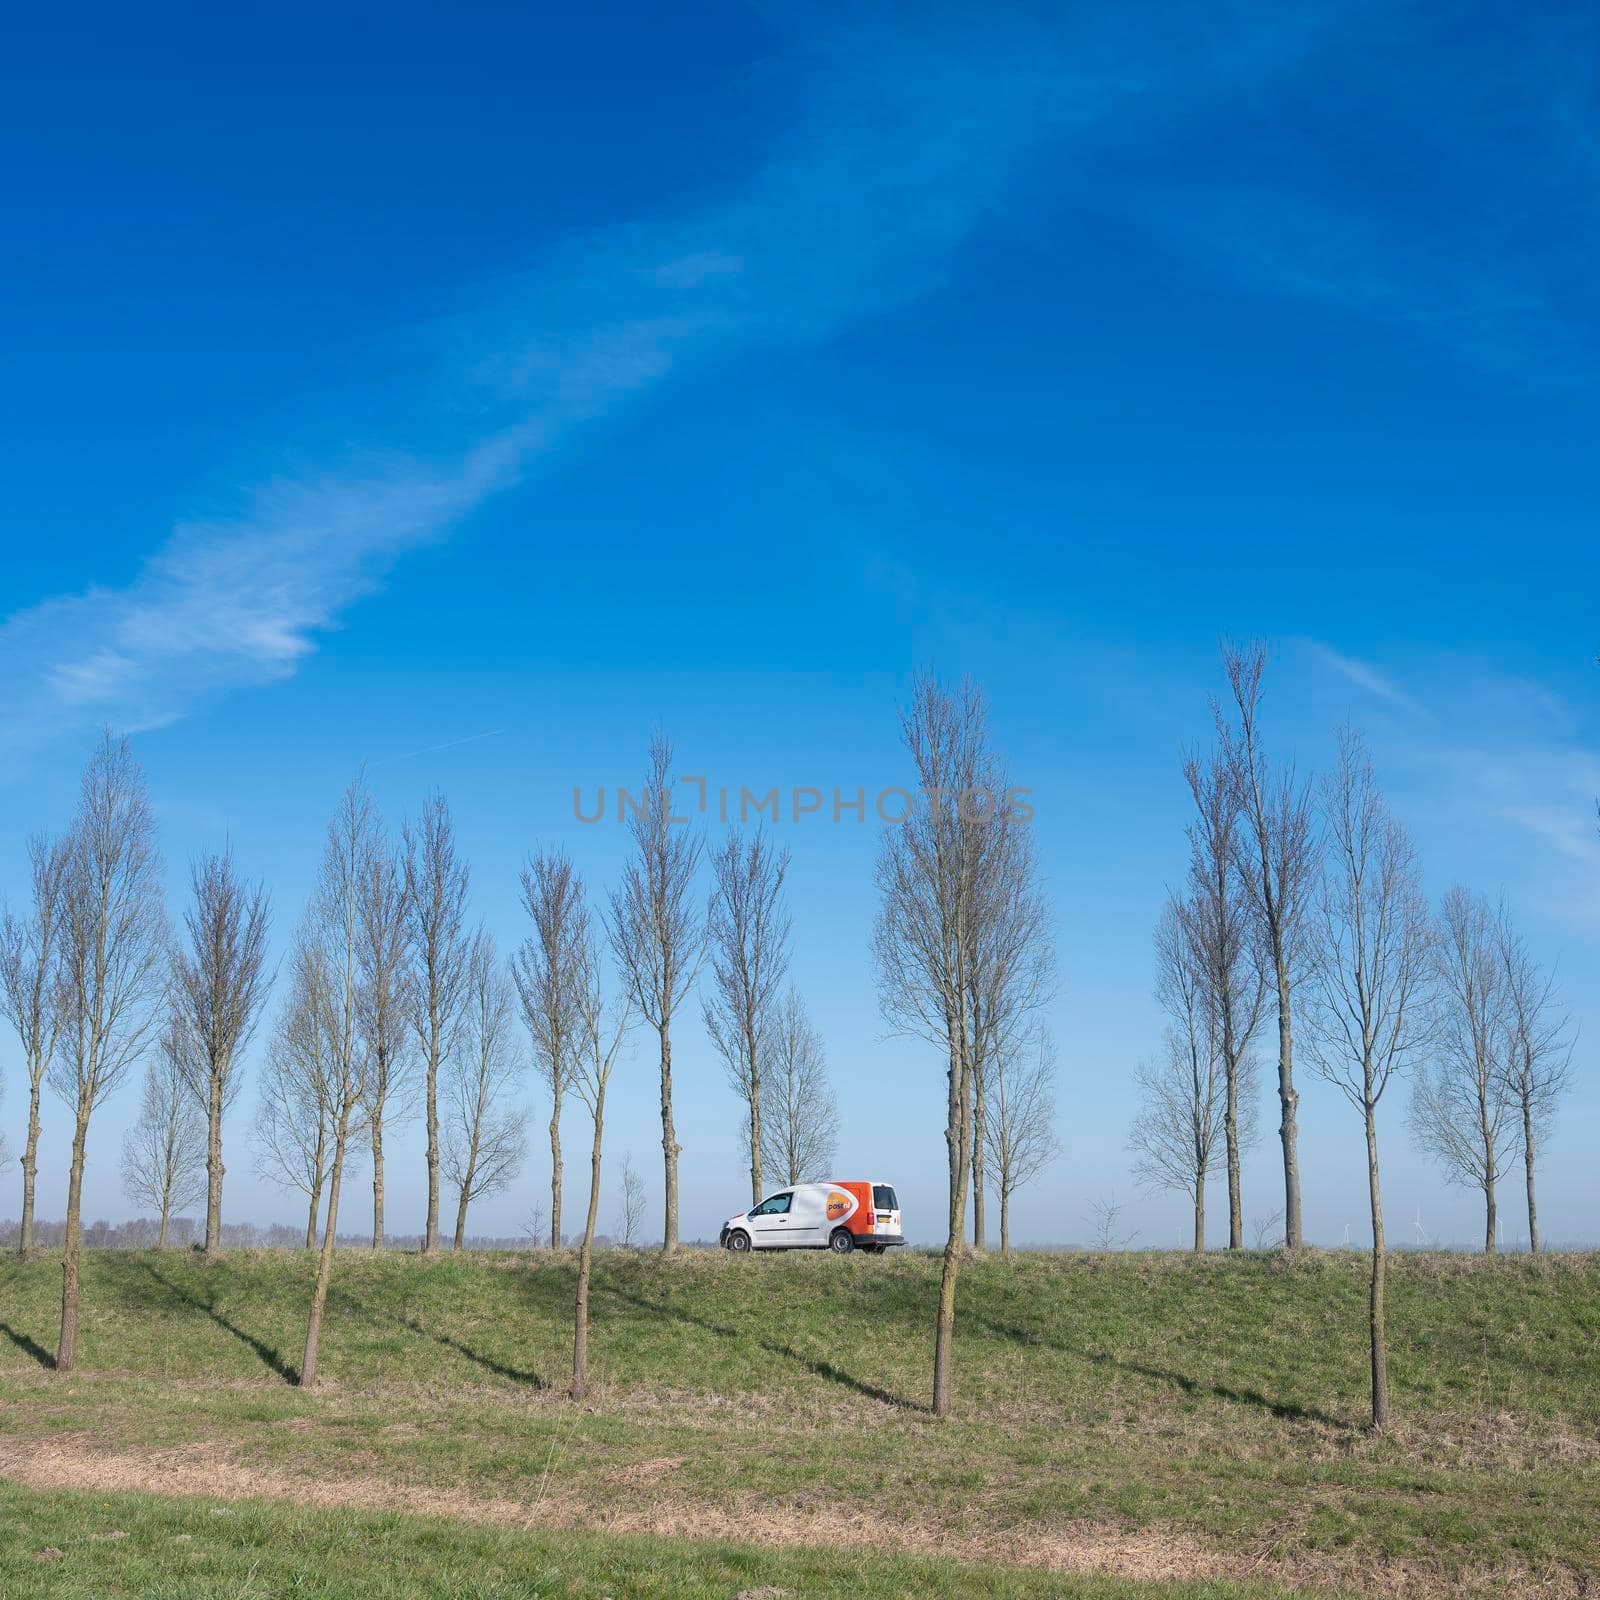 car of mail delivery on dyke of goeree overflkakkee in the netherlands under blue sky by ahavelaar